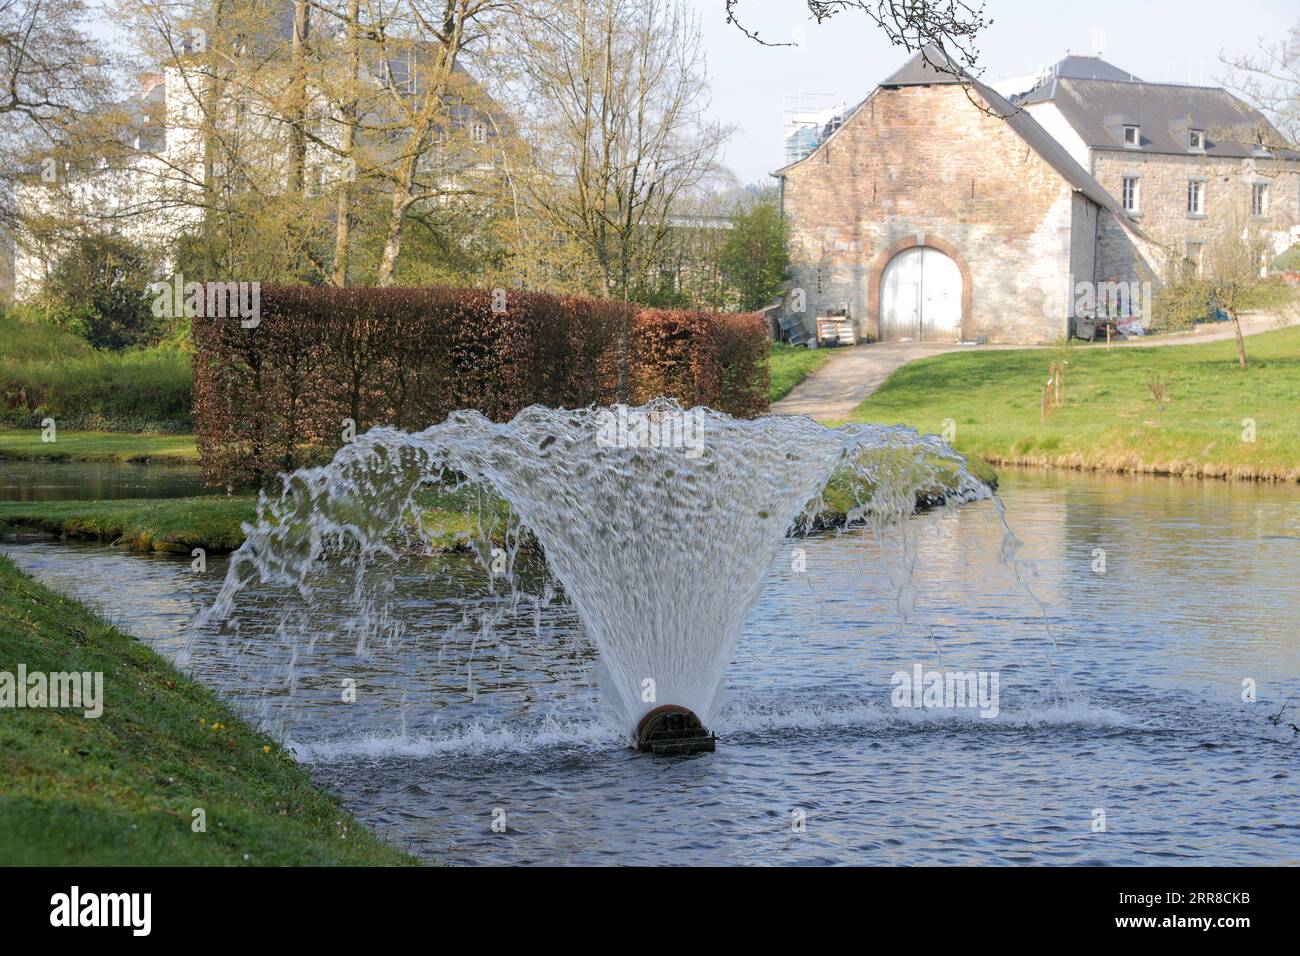 210501 -- NAMUR, May 1, 2021 -- A pond and a fountain are seen in the Water Gardens of Annevoie in Annevoie-Rouillon, Namur, Belgium, May 1, 2021. The Water Gardens of Annevoie were designed and built by Charles-Alexis de Montpellier in the 18th century, with the combination of three ideas: art enhancing nature , art in tune with nature and art imitating nature . In 1930 the Gardens were opened for the general public. In 1982, the entire estate, including the gardens and the buildings, were listed as Historical Monuments.  BELGIUM-NAMUR-WATER GARDENS OF ANNEVOIE-SCENERY ZhengxHuansong PUBLICAT Stock Photo